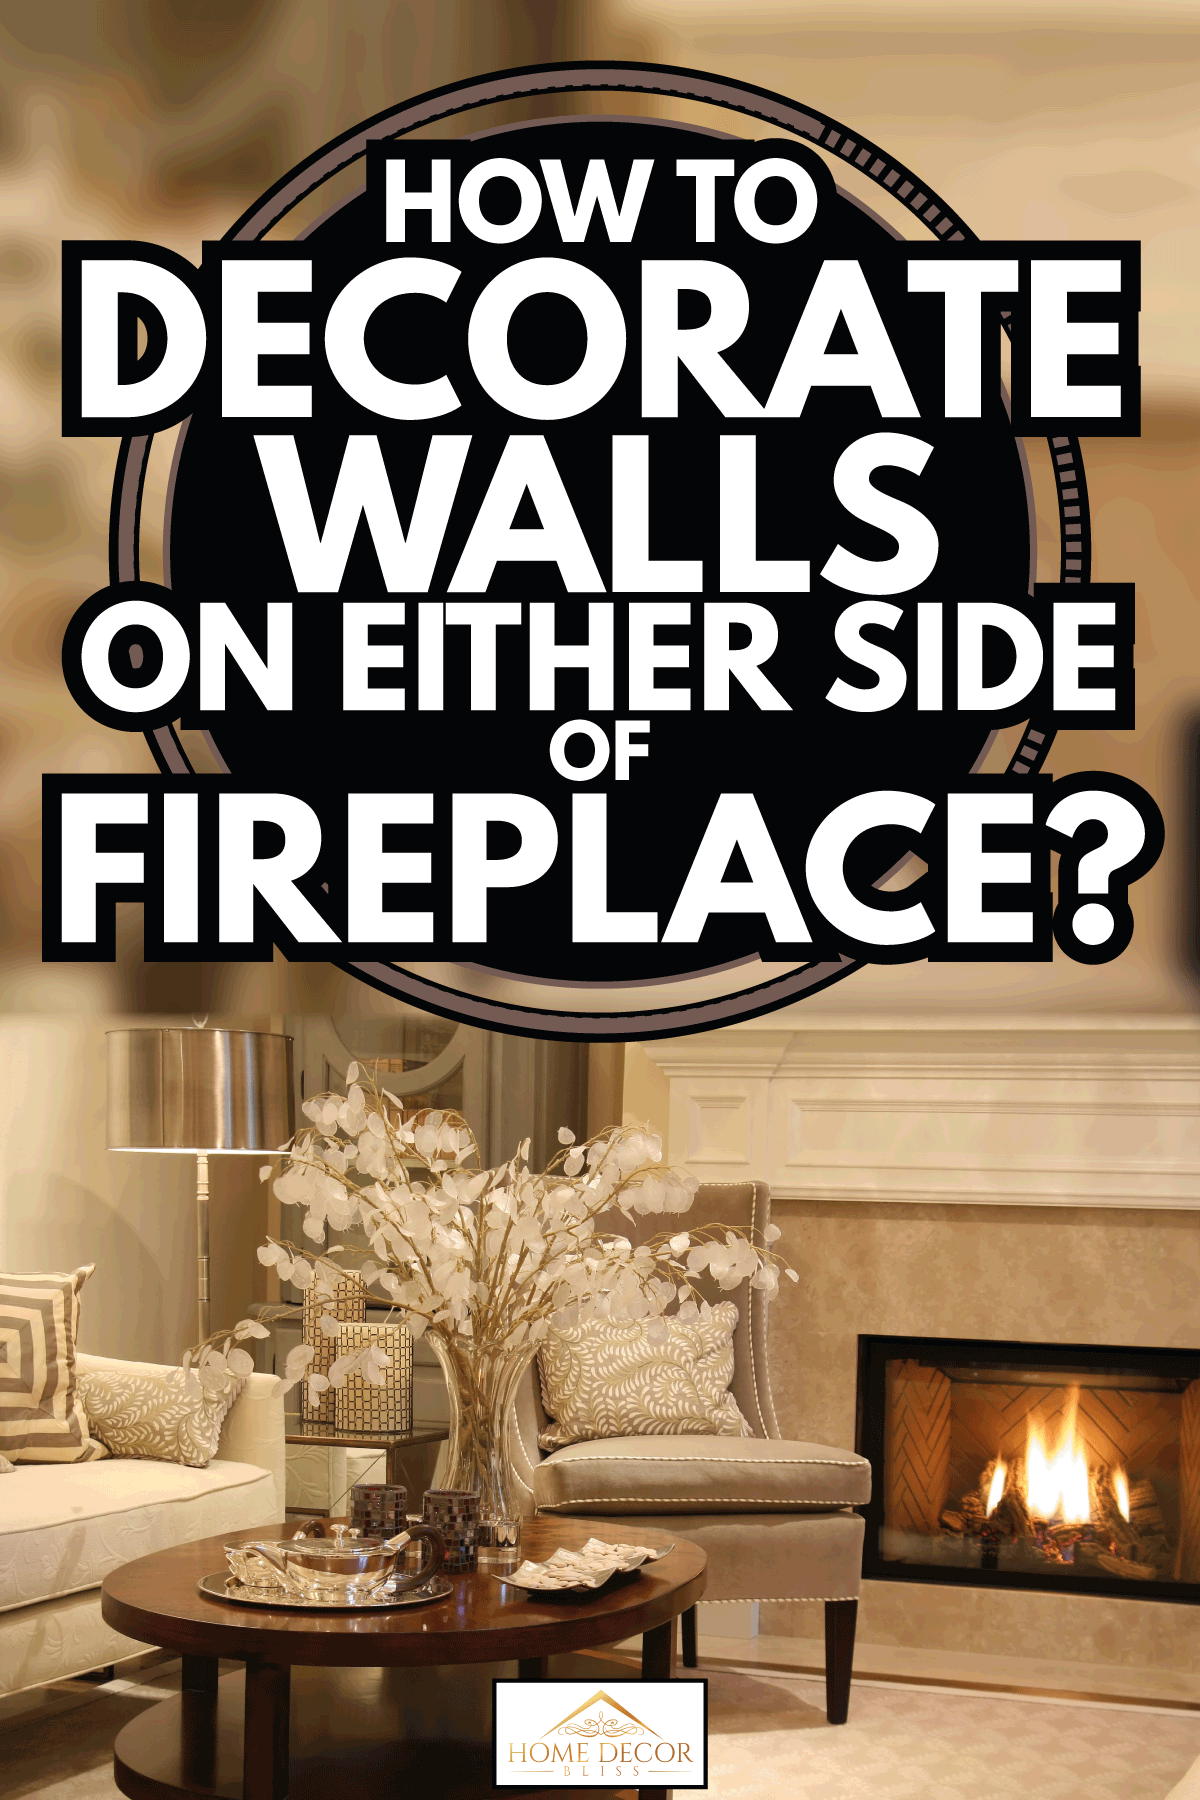 Nicely decorated living room with fireplace on. How To Decorate Walls On Either Side Of Fireplace